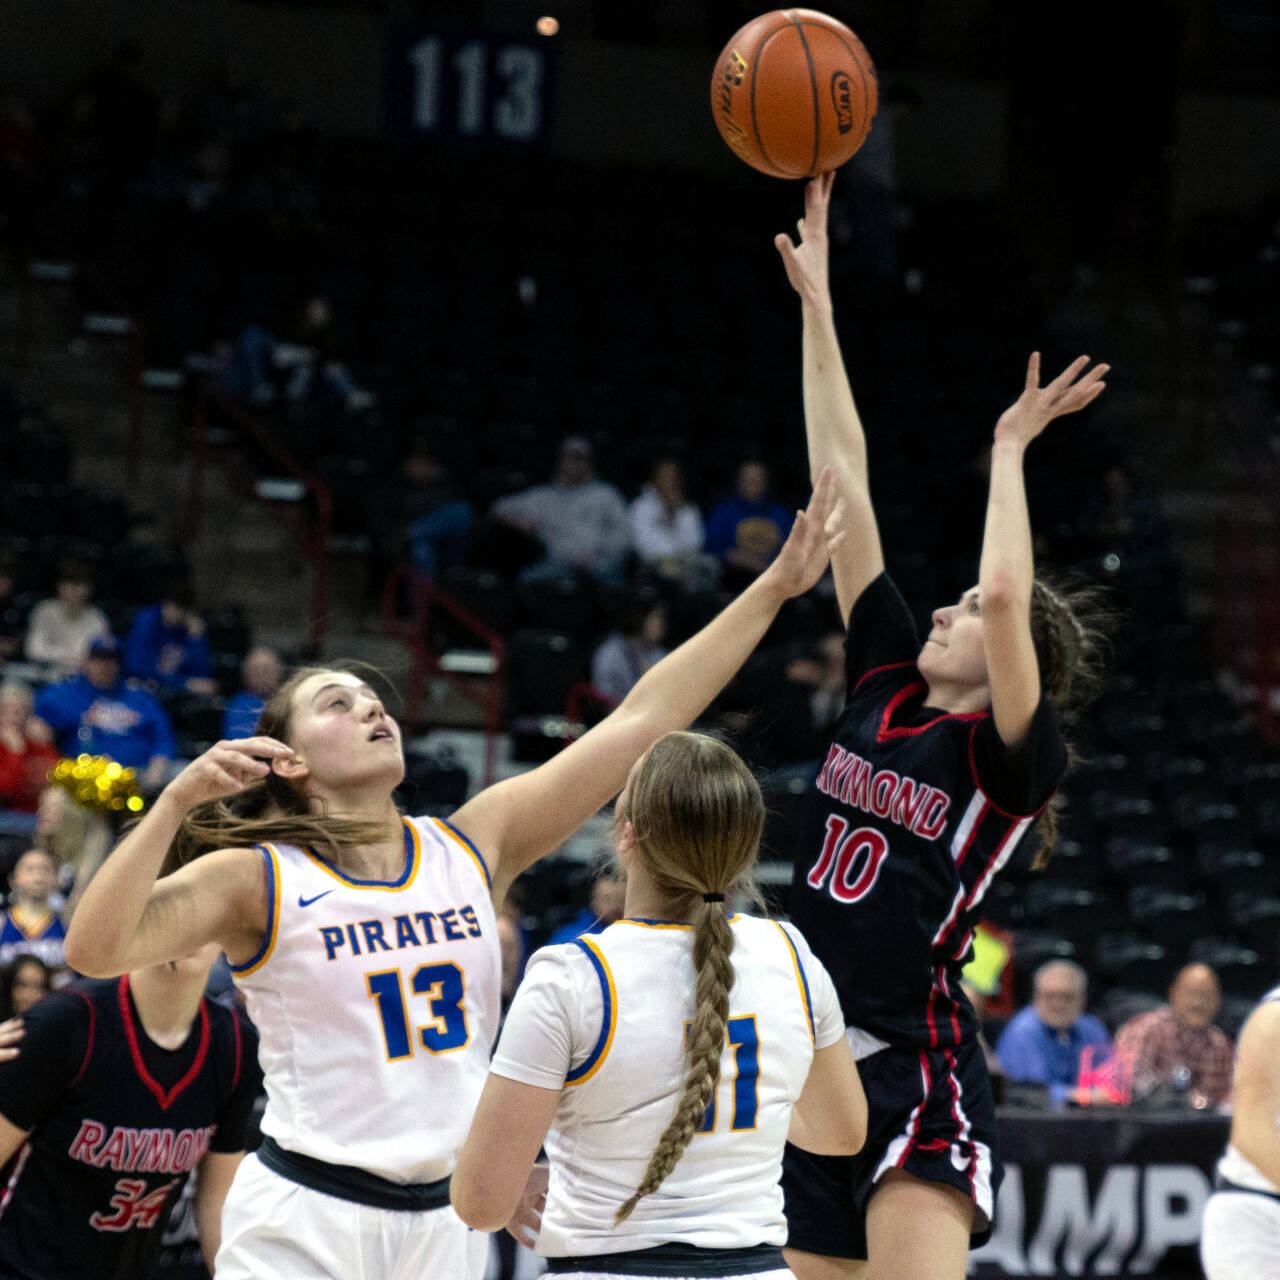 ALEC DIETZ | THE CHRONICLE Raymond forward Alia Enlow (10) takes a shot from the post against Adna in the 2B State Round of 12 on Wednesday at the Spokane Arena.